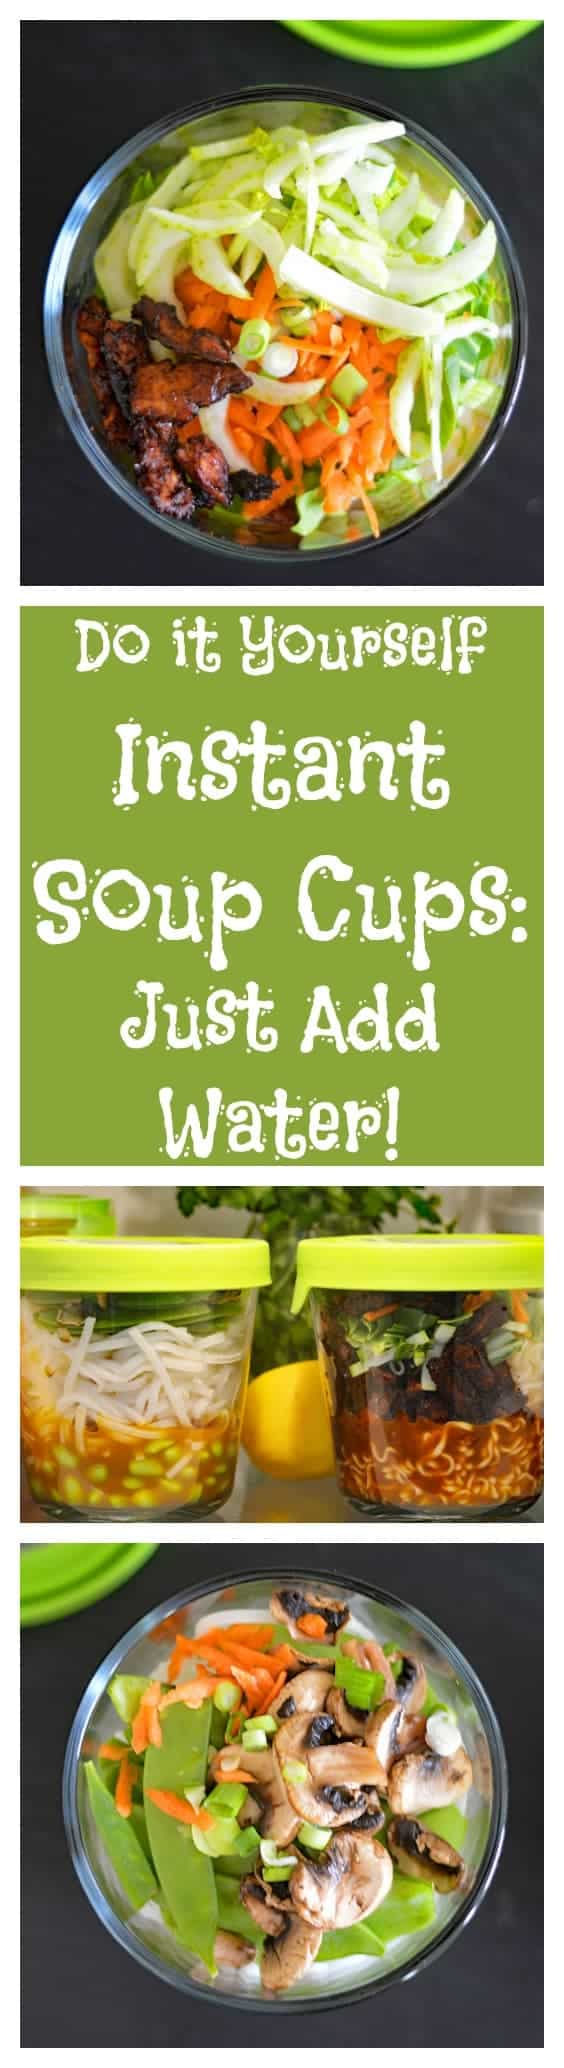 DIY Instant Soup Cups: Just Add Water!